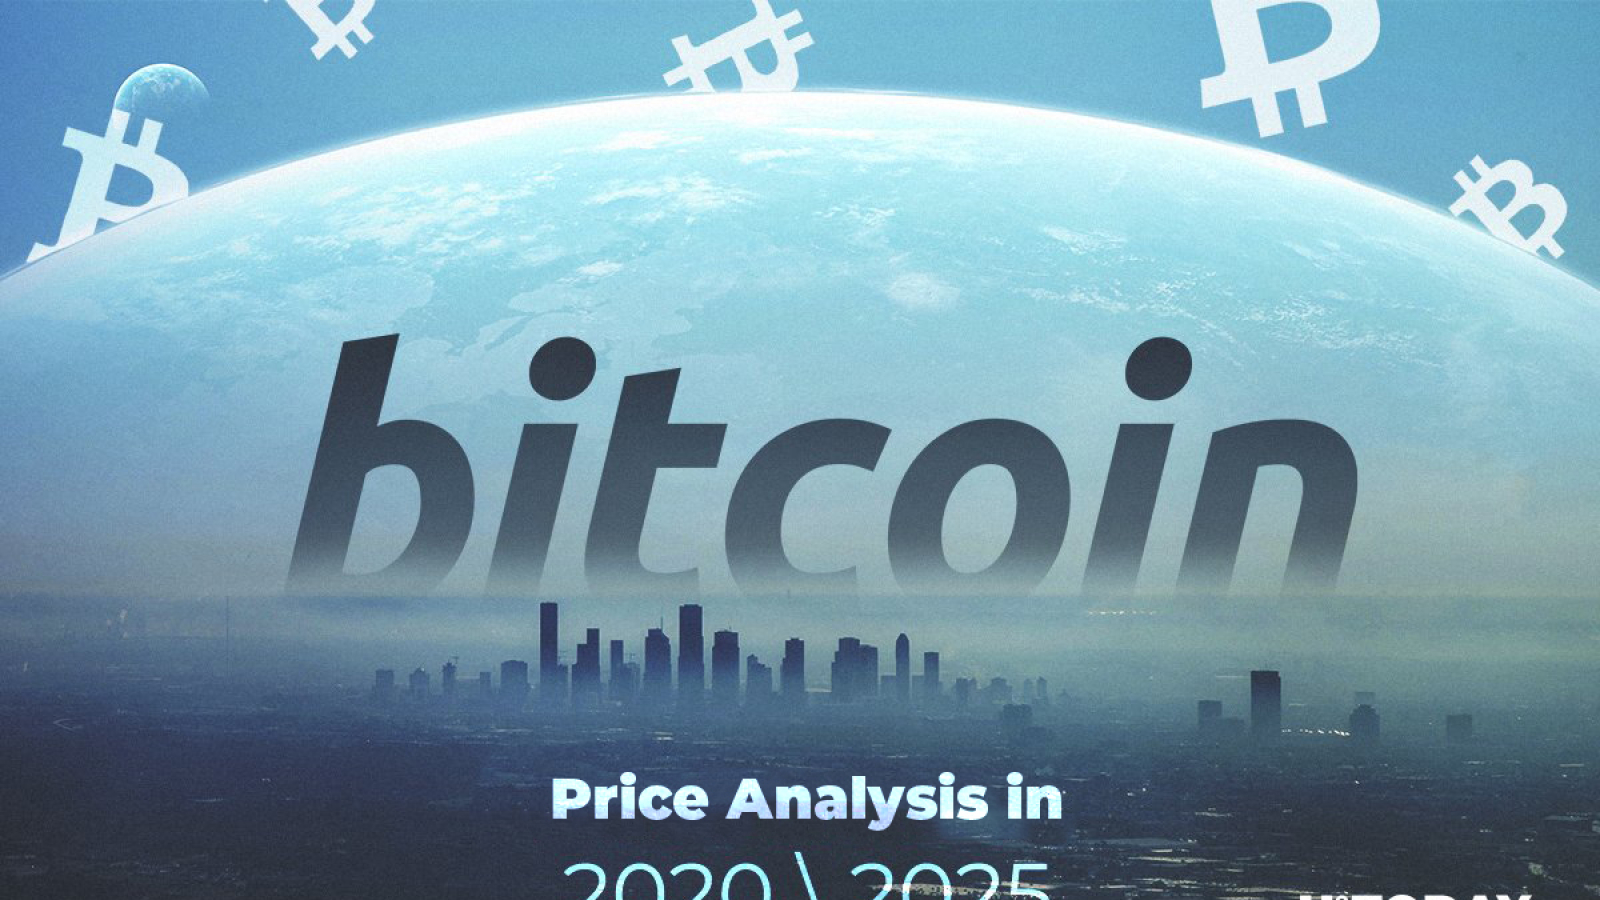 Bitcoin Price Analysis in 2020\2025: How Much Might Bitcoin be Worth?